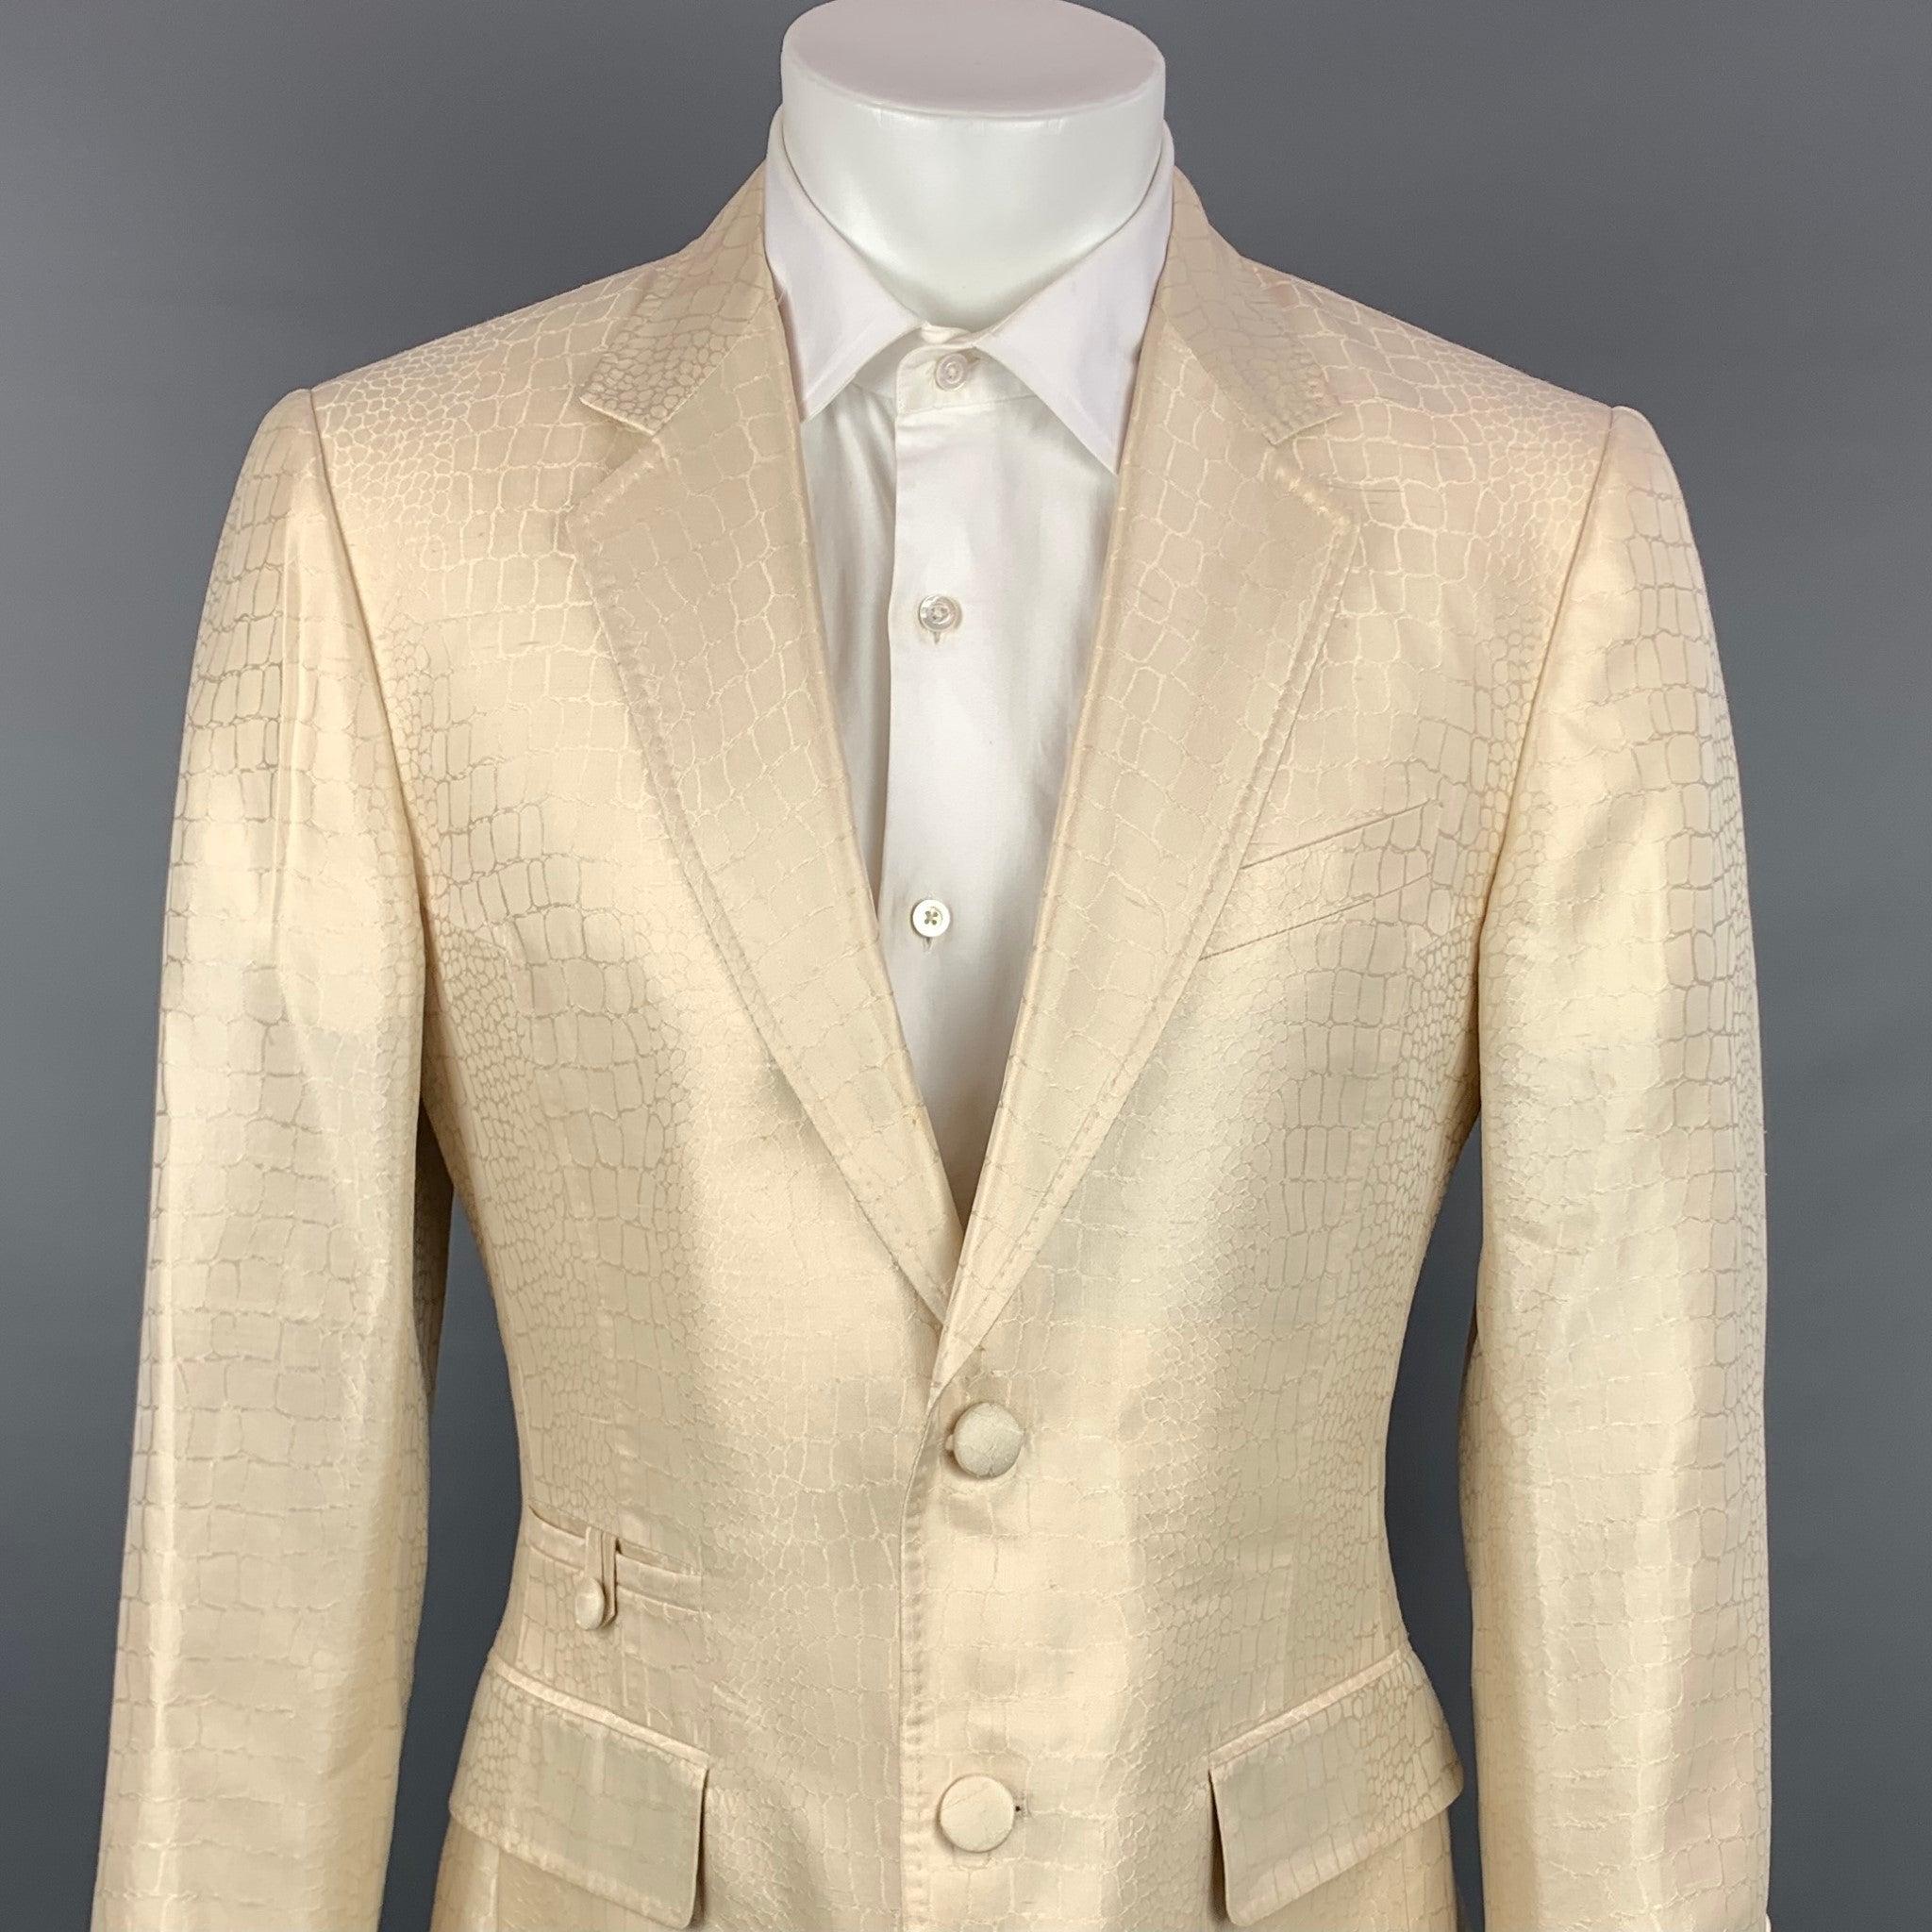 ROBERTO CAVALLI sport coat comes in a beige animal print silk with a full liner featuring a notch lapel, flap pockets, and a two covered button closure. Made in Italy.
Very Good
Pre-Owned Condition. Faint marking at front.  

Marked:   IT 50 